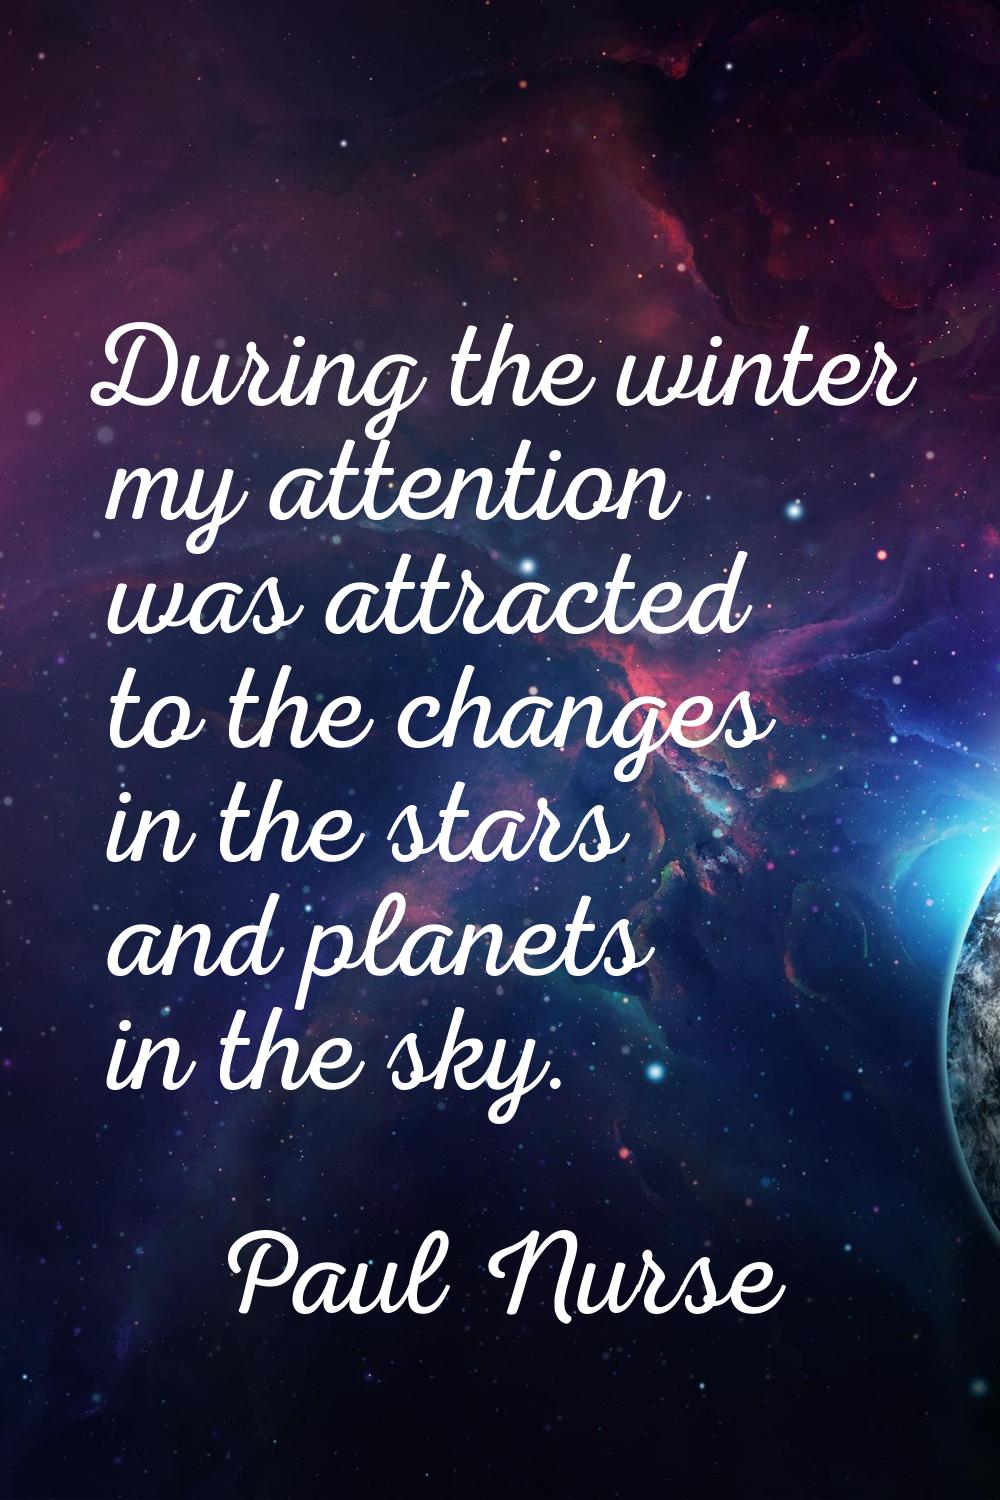 During the winter my attention was attracted to the changes in the stars and planets in the sky.